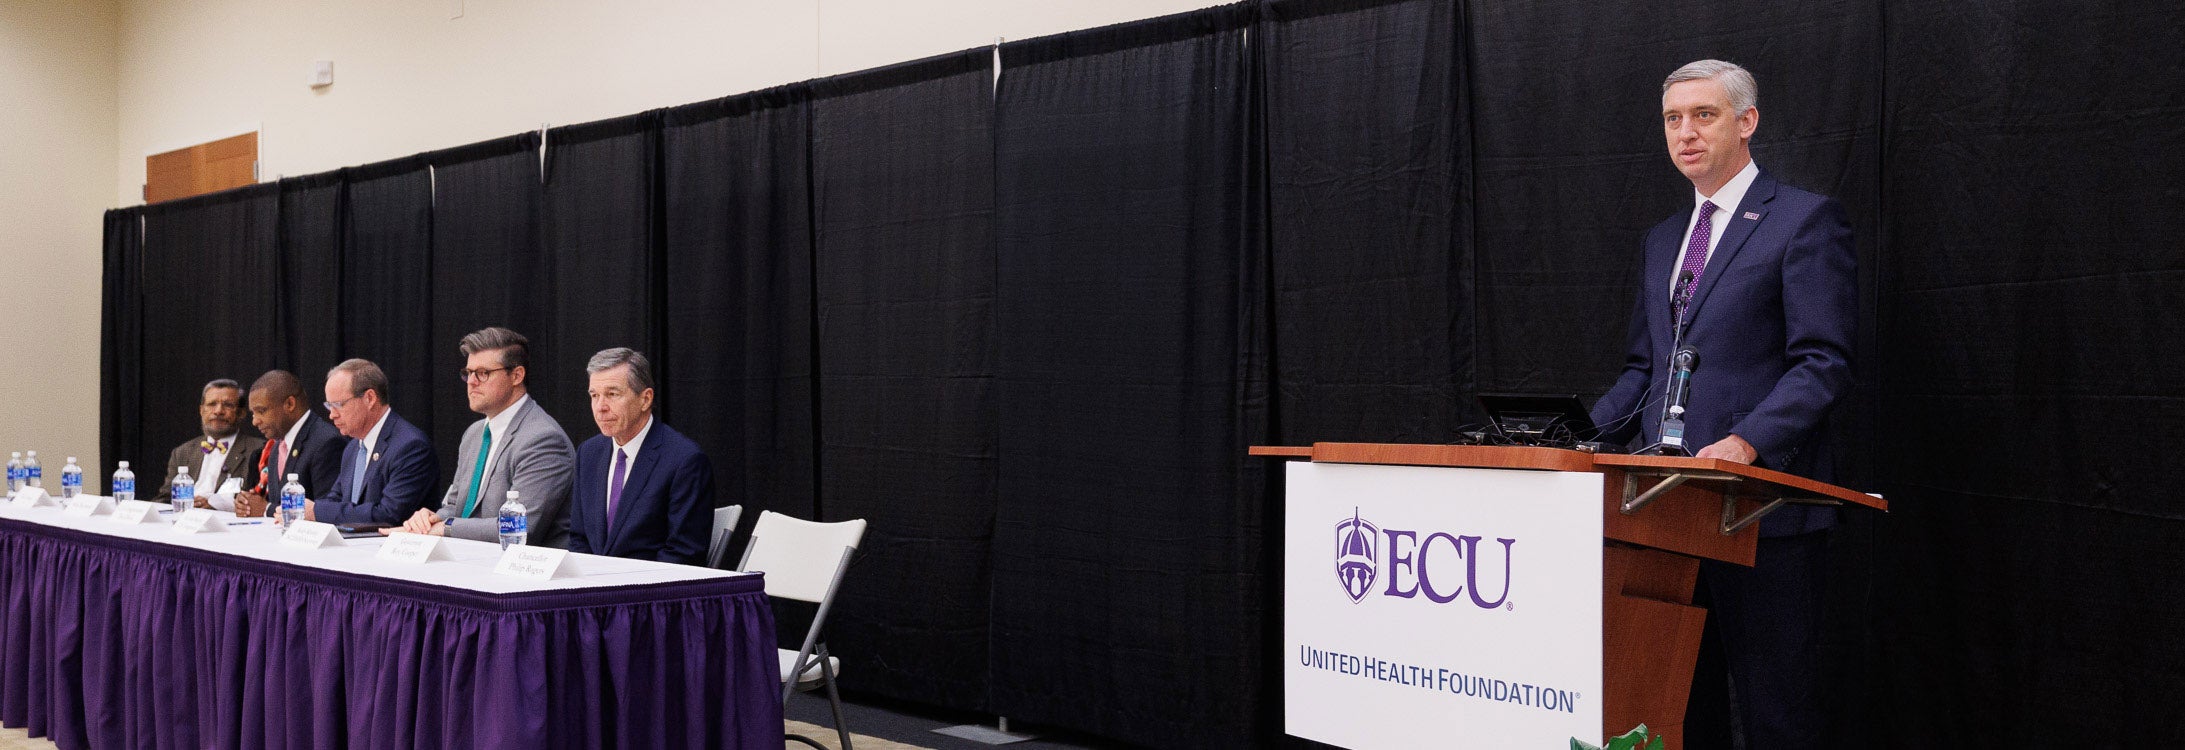 East Carolina University Chancellor Philip Rogers joins Gov. Roy Cooper, and additional state and campus leaders, to announce a $3.2 million United Health Foundation grant.